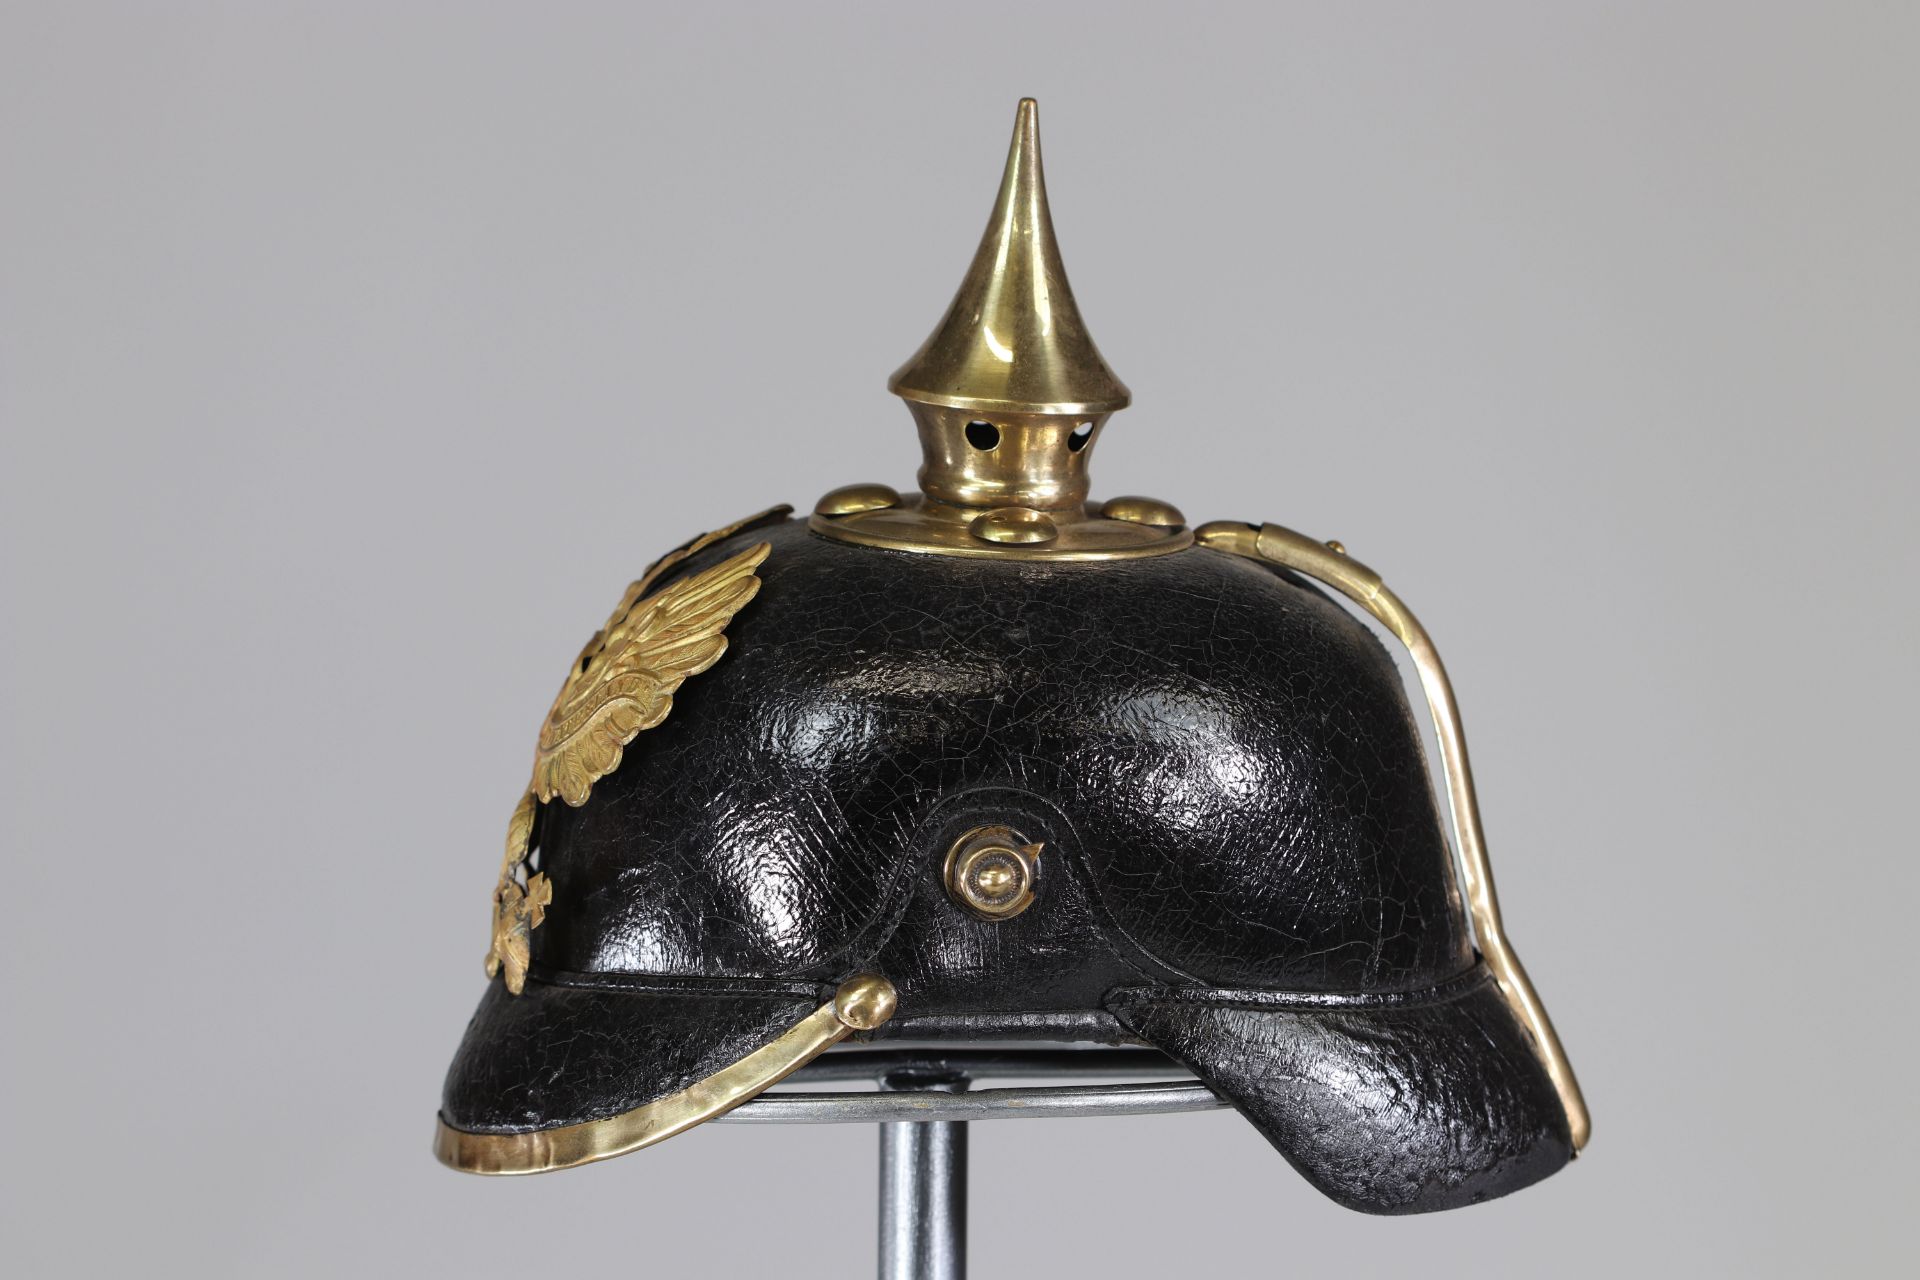 German 14-18 infantry helmet with protective cover - Image 3 of 6